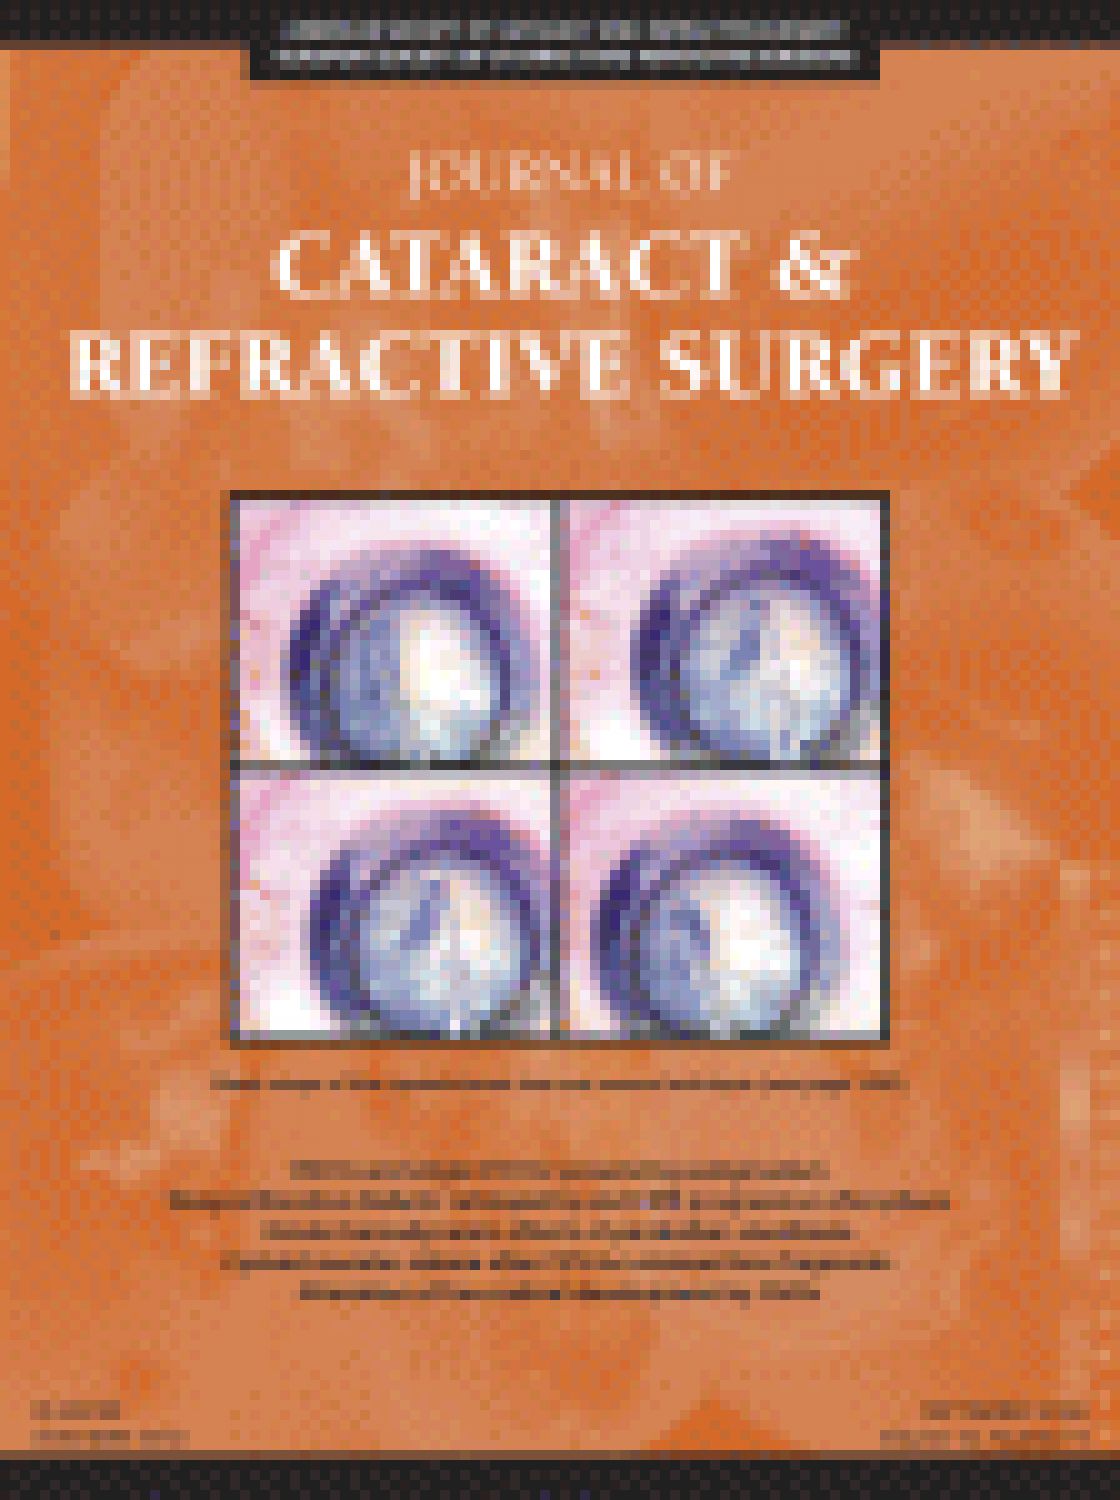 Corneal melting associated with topical diclofenac use after laser-assisted subepithelial keratectomy.